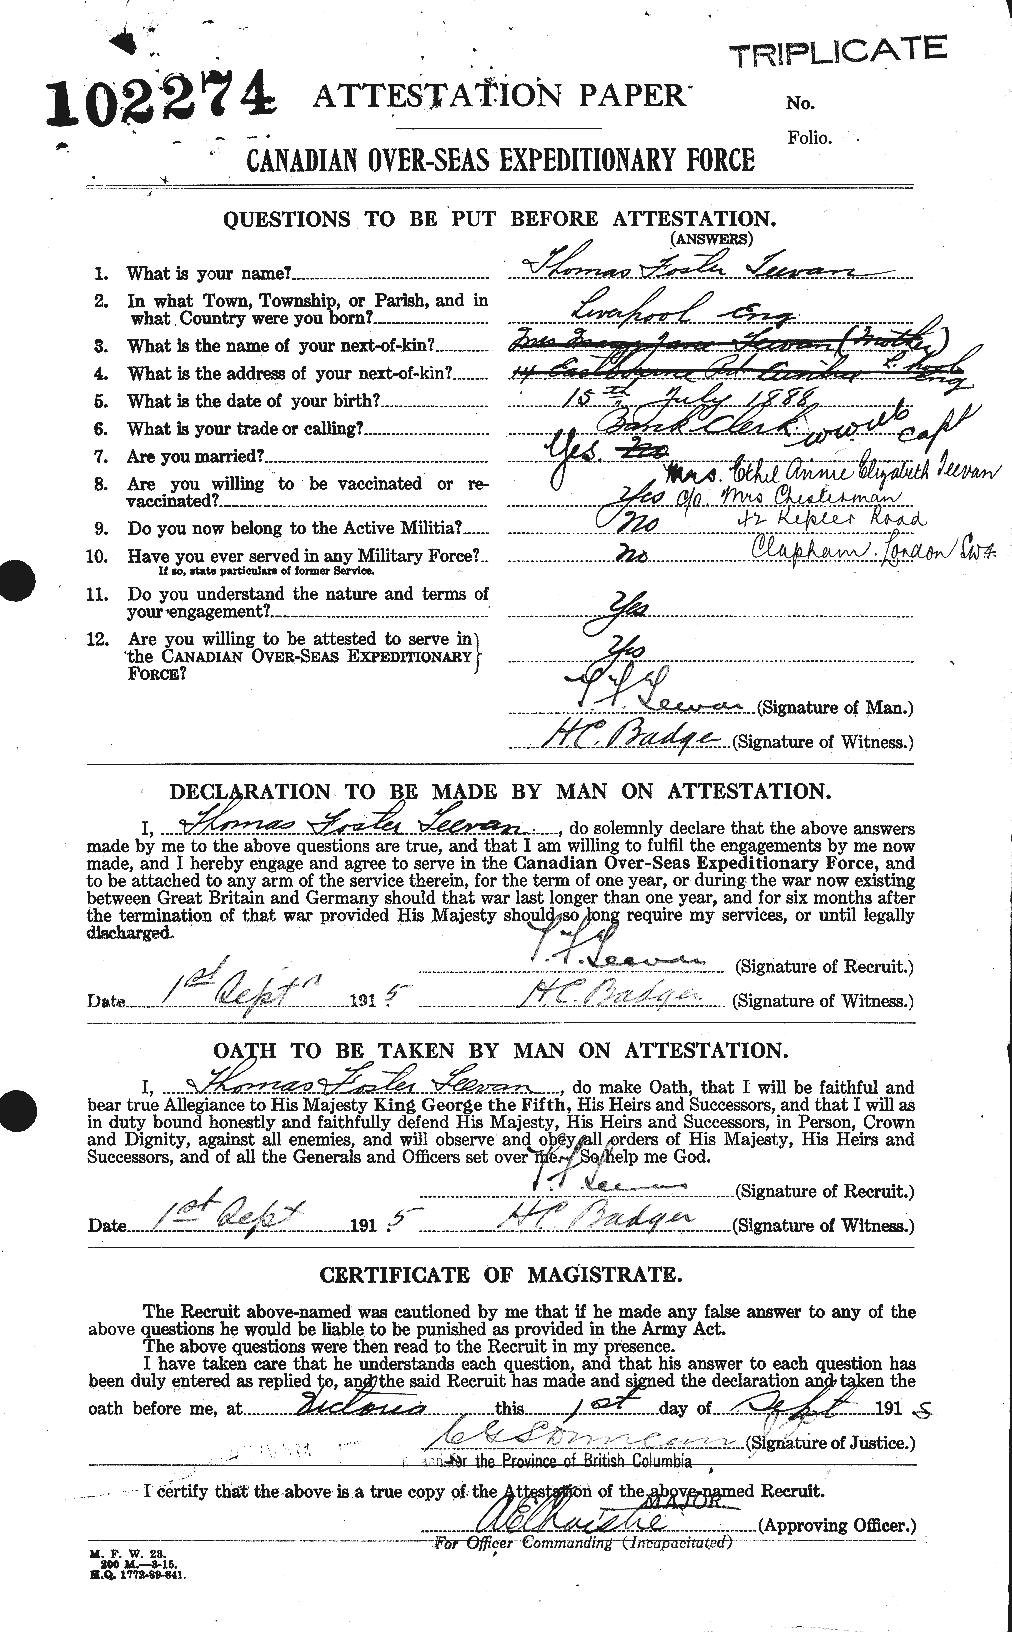 Personnel Records of the First World War - CEF 628833a